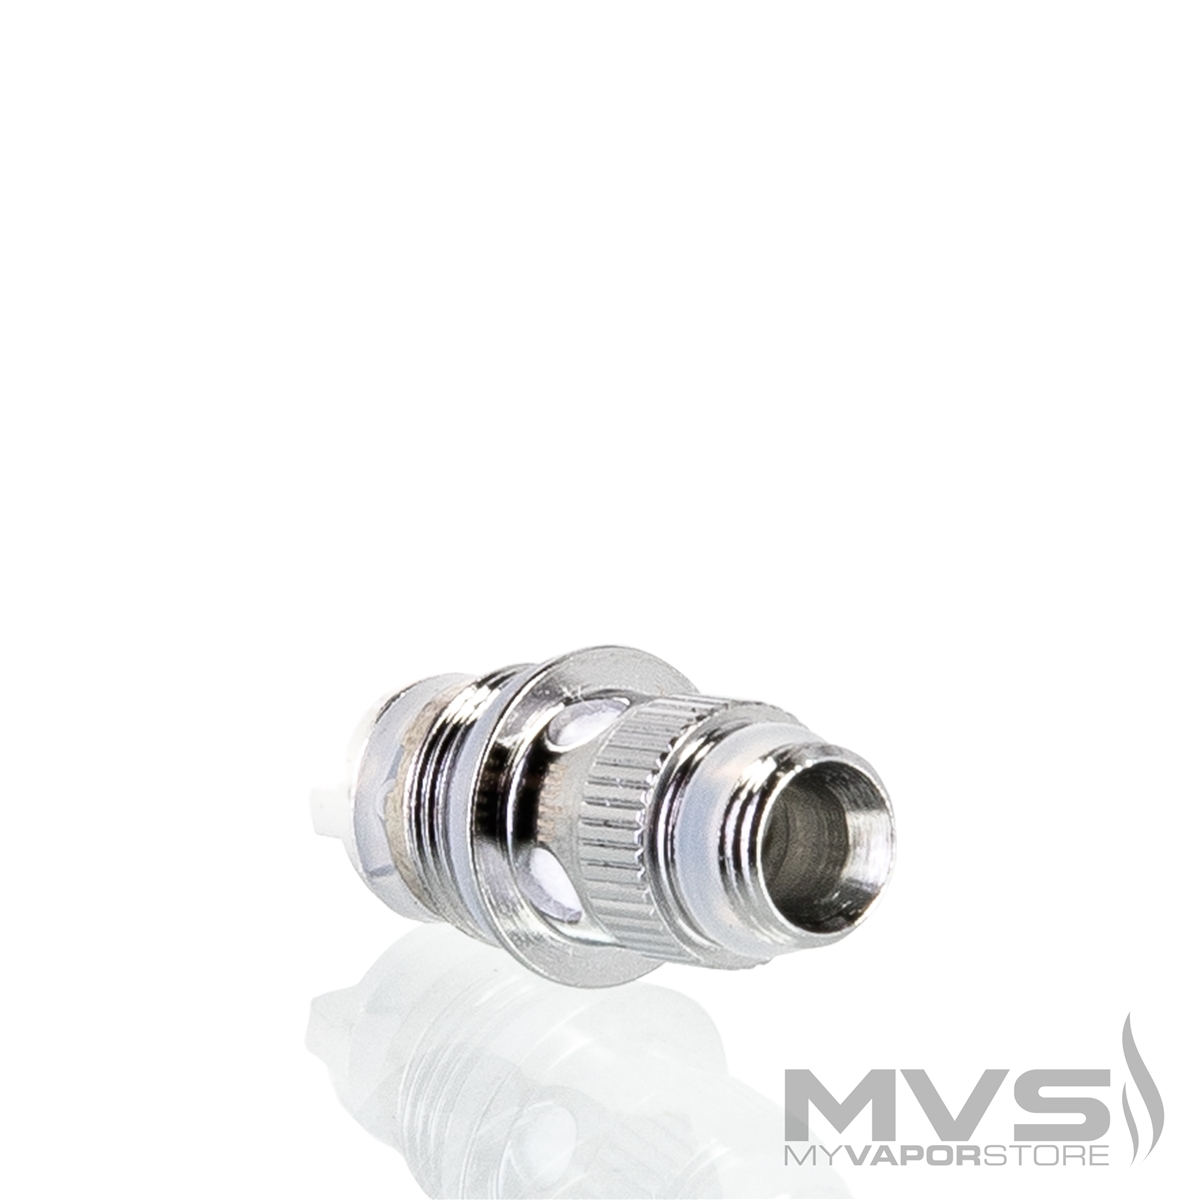 GeekVape Flint NS Replacement Coil Replacement Coil - Pack of 5